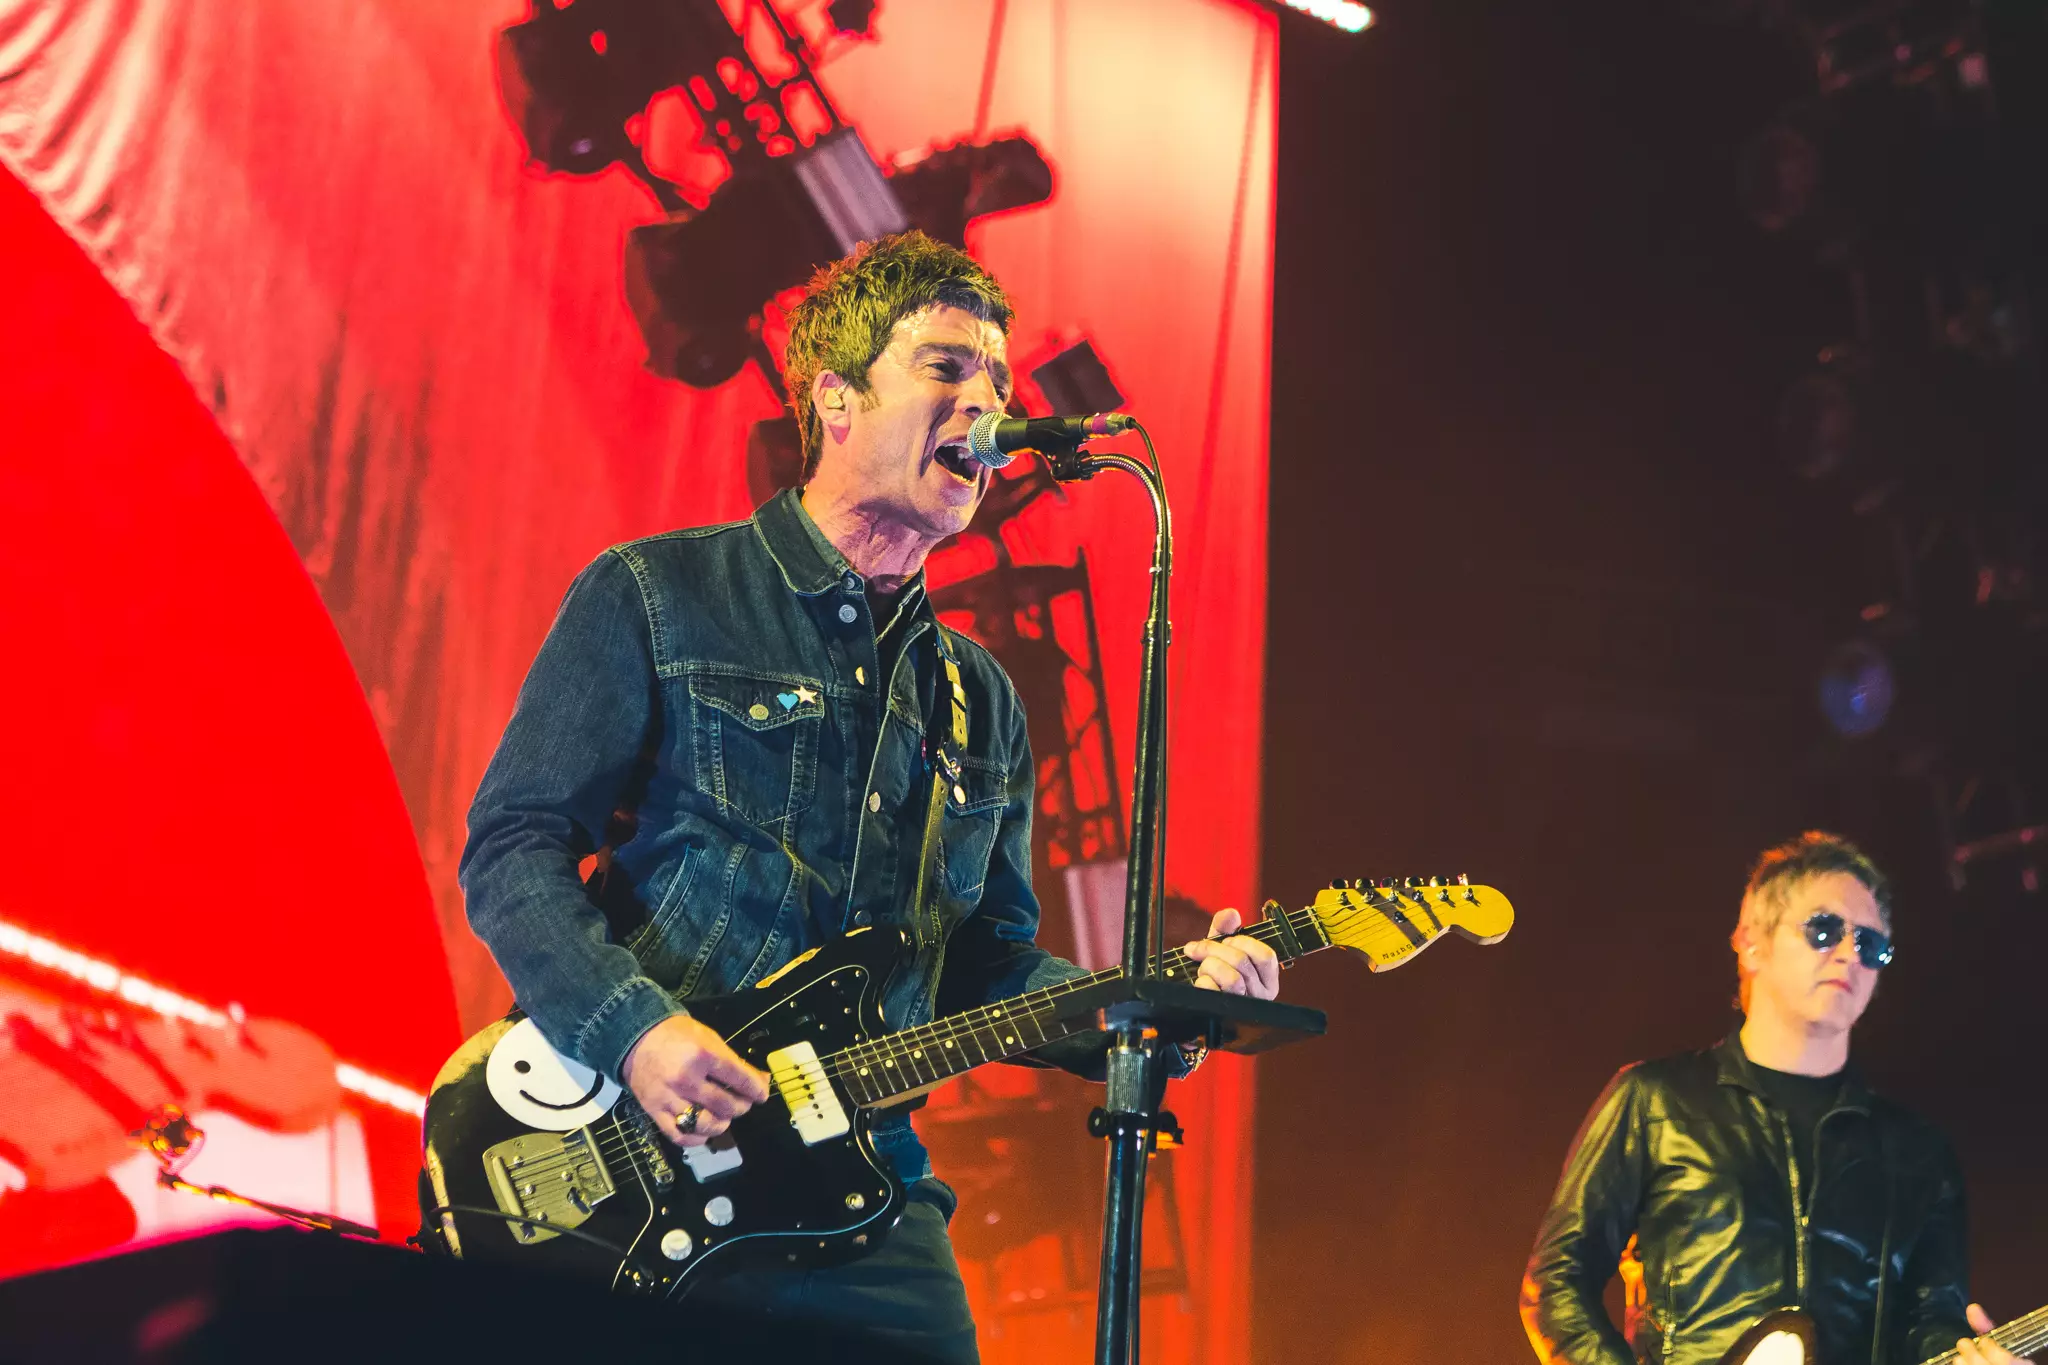 Noel Gallagher said he would like to start a petition to get Foo Fighters to break up.